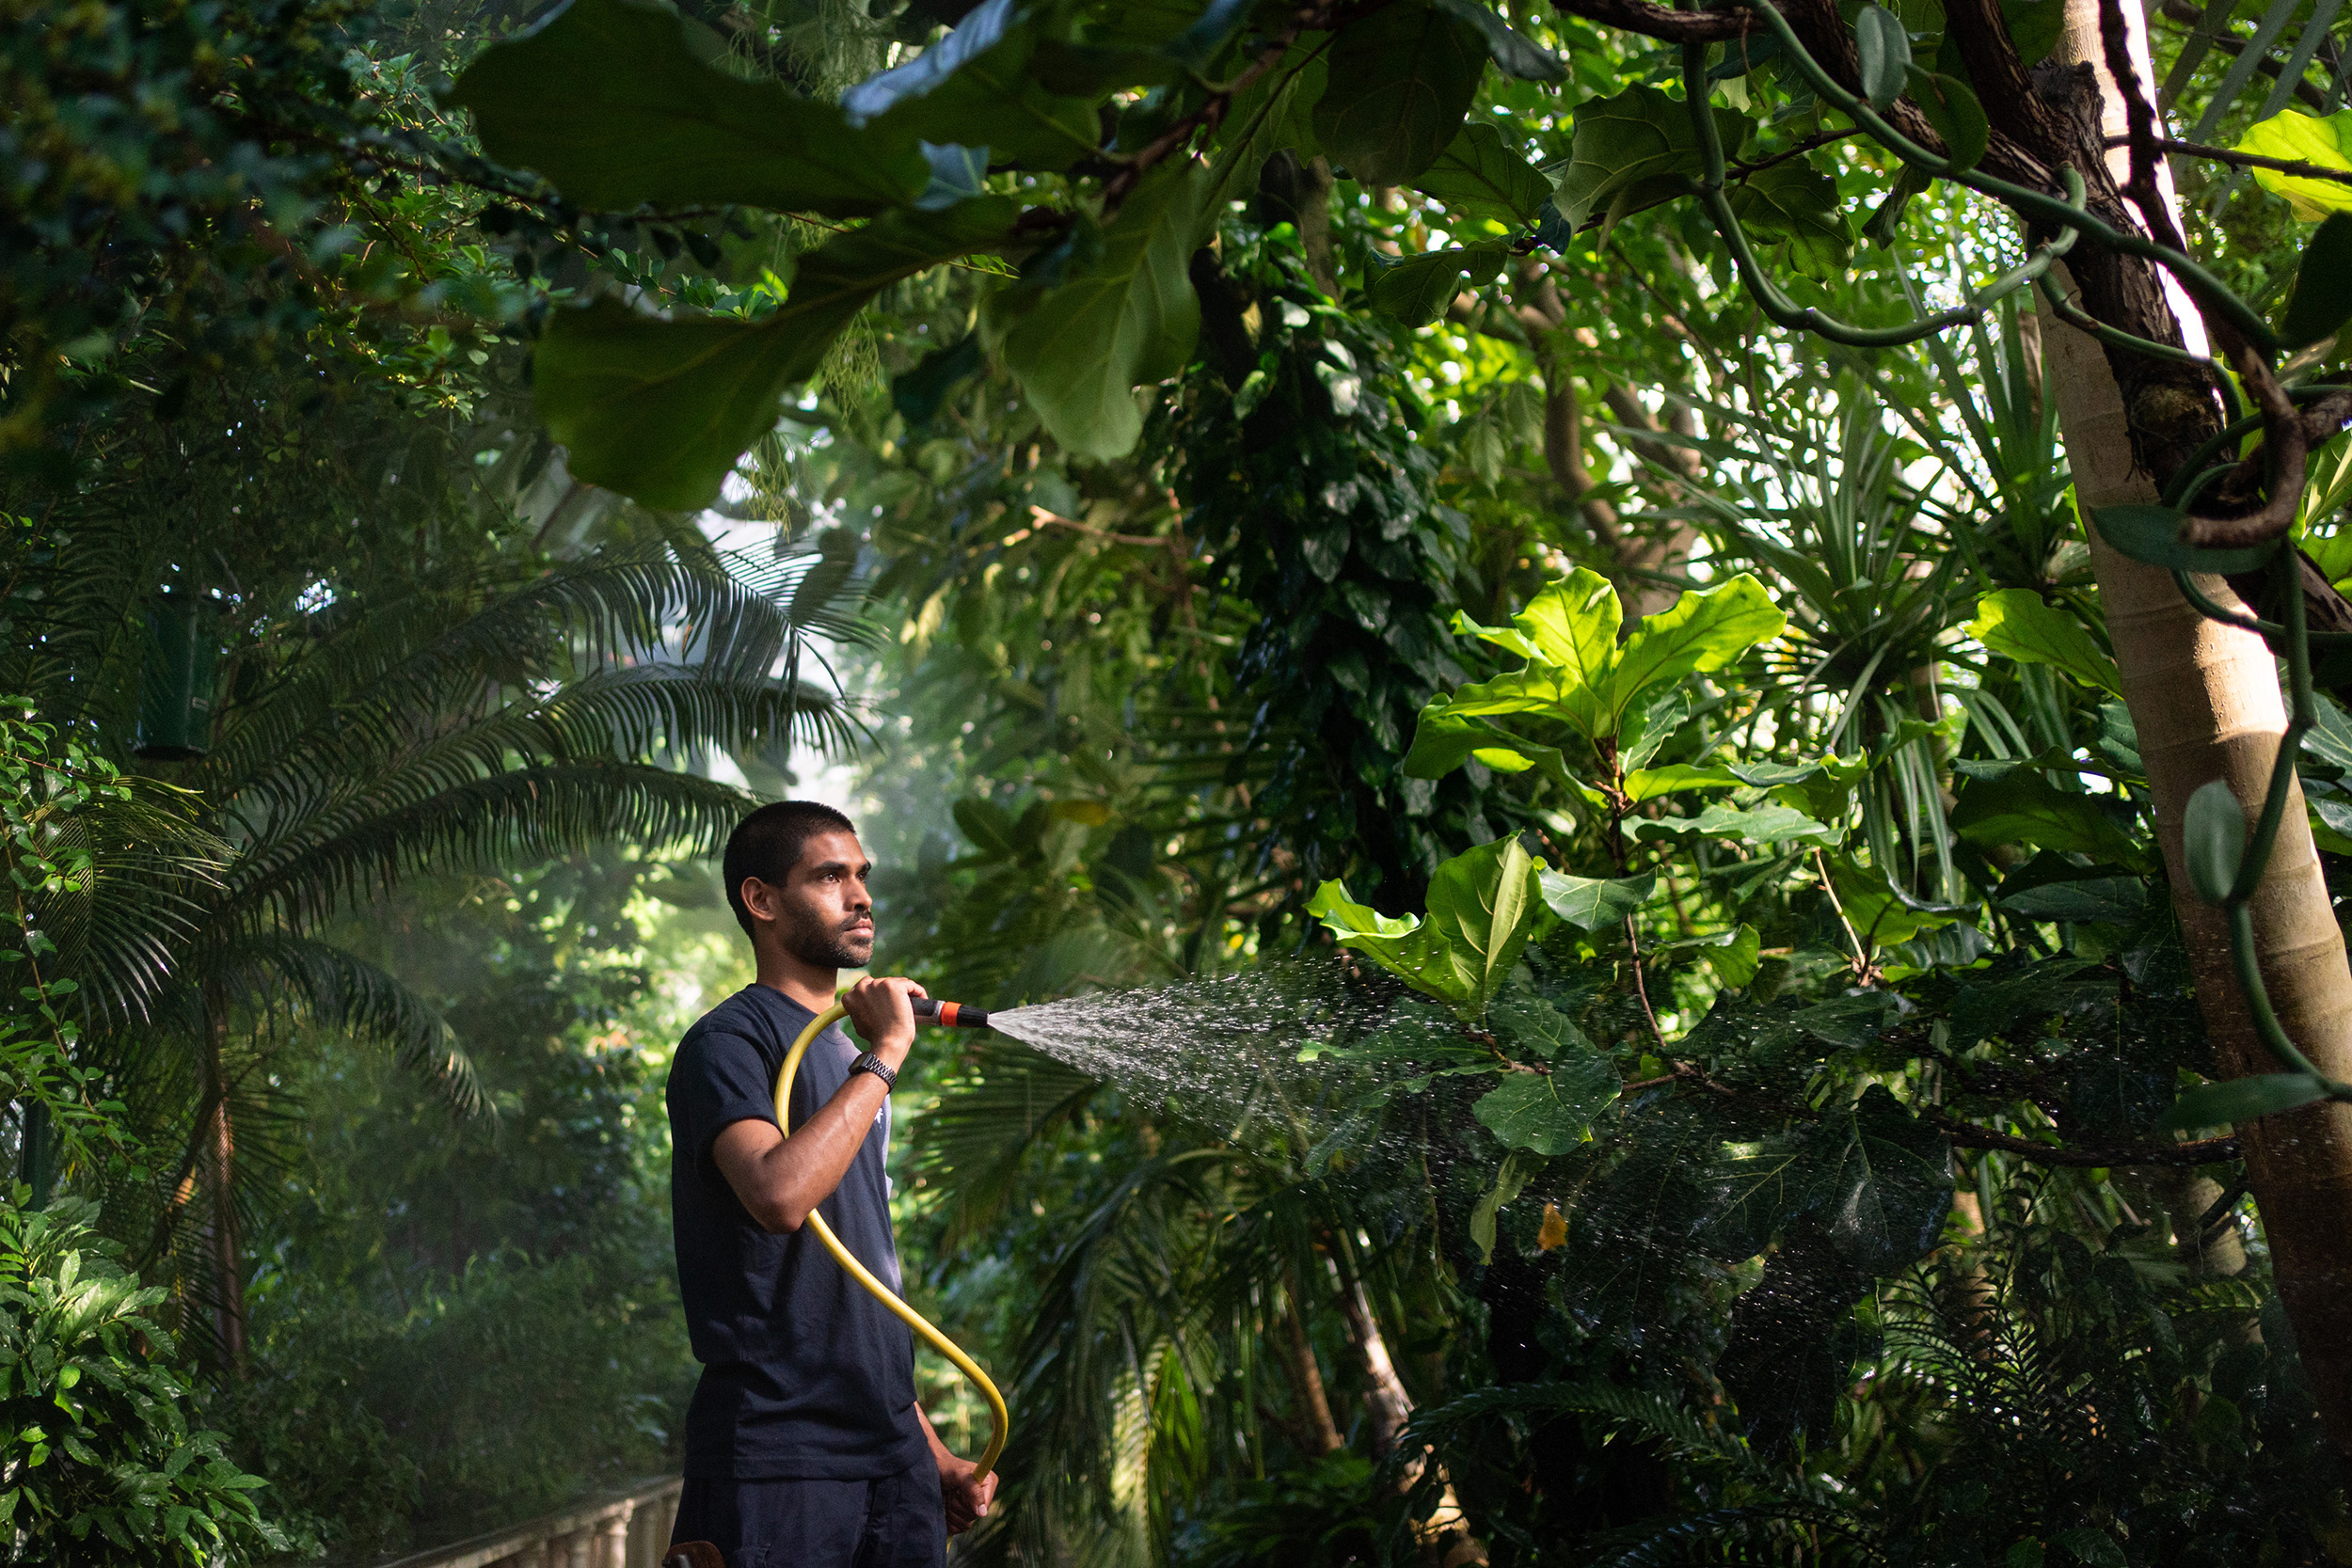 Horticulture student Muhammed Ismail Moosa waters the plants in the Palm House at the Royal Botanical Gardens Kew, west London, on July 18, where temperatures inside the greenhouses are cooler than outside during the heatwave.